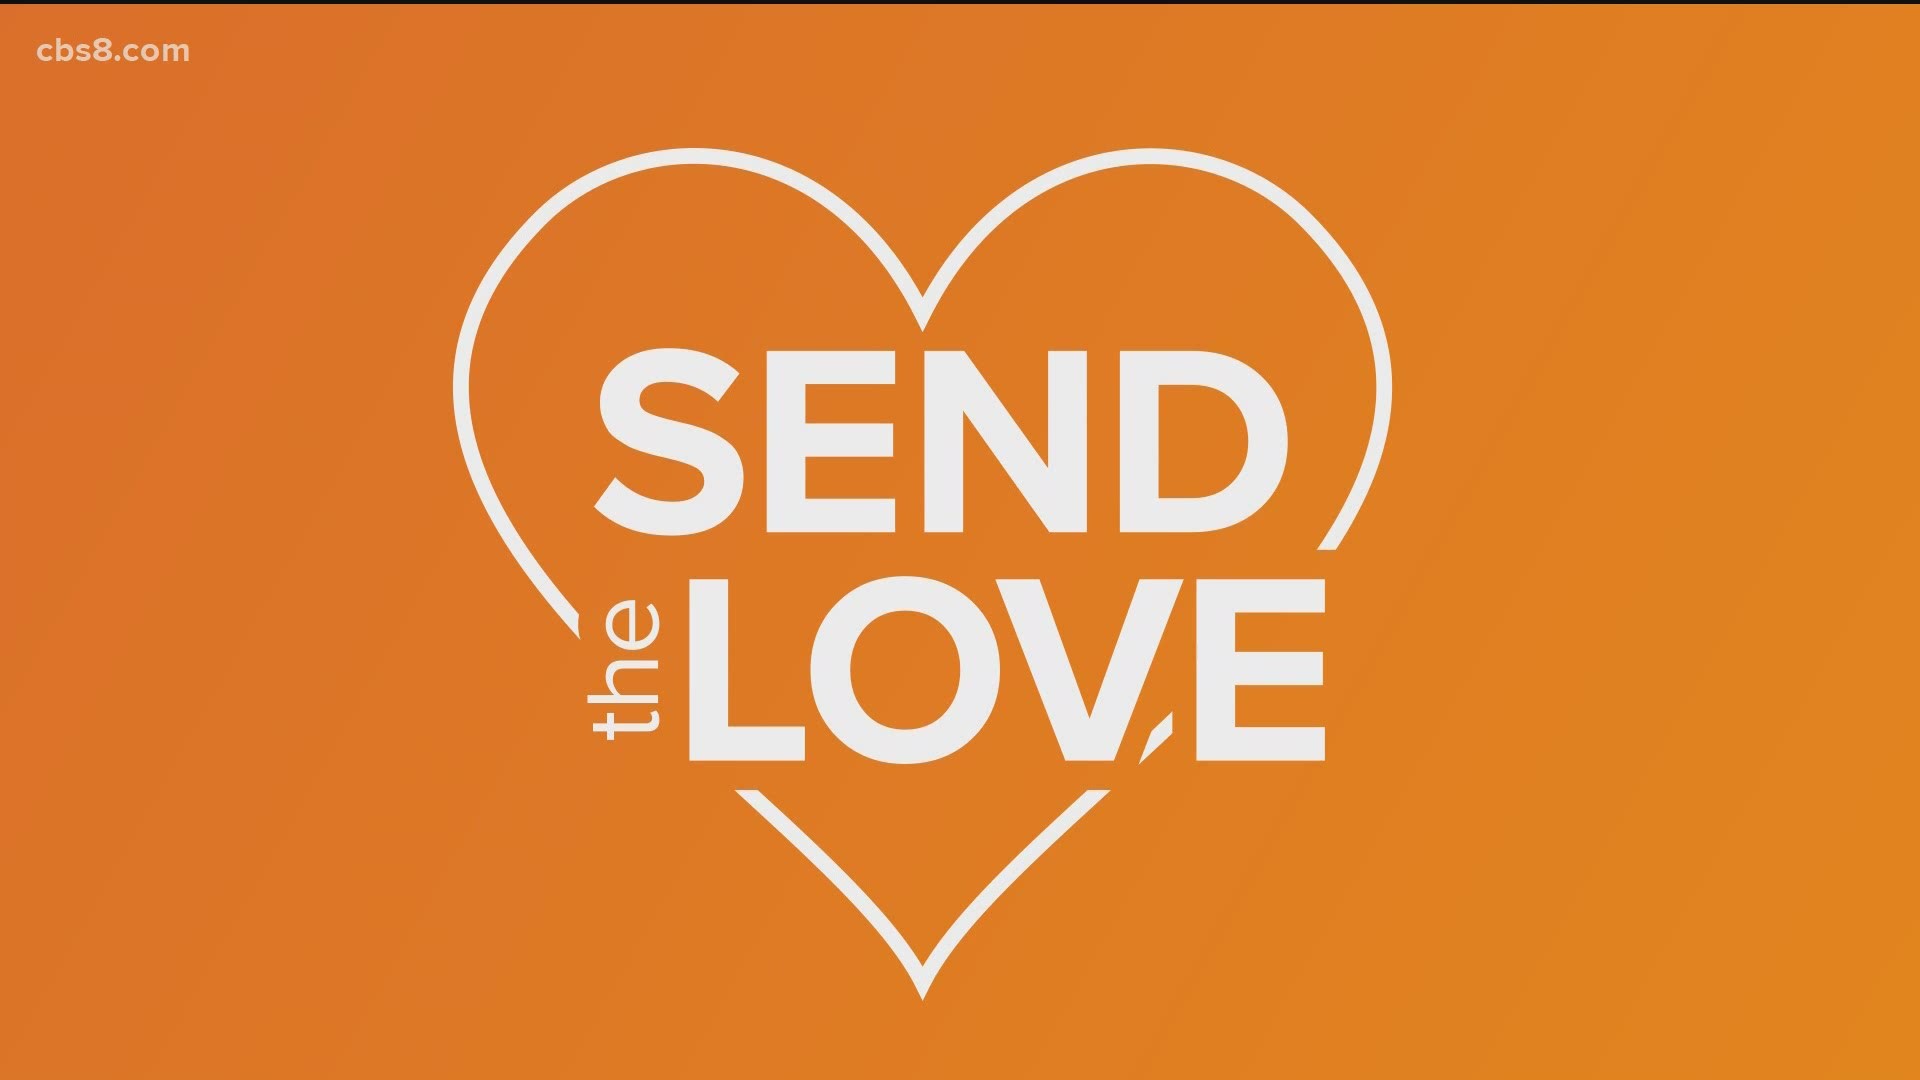 We want you to send the love so we can share it with all of San Diego!